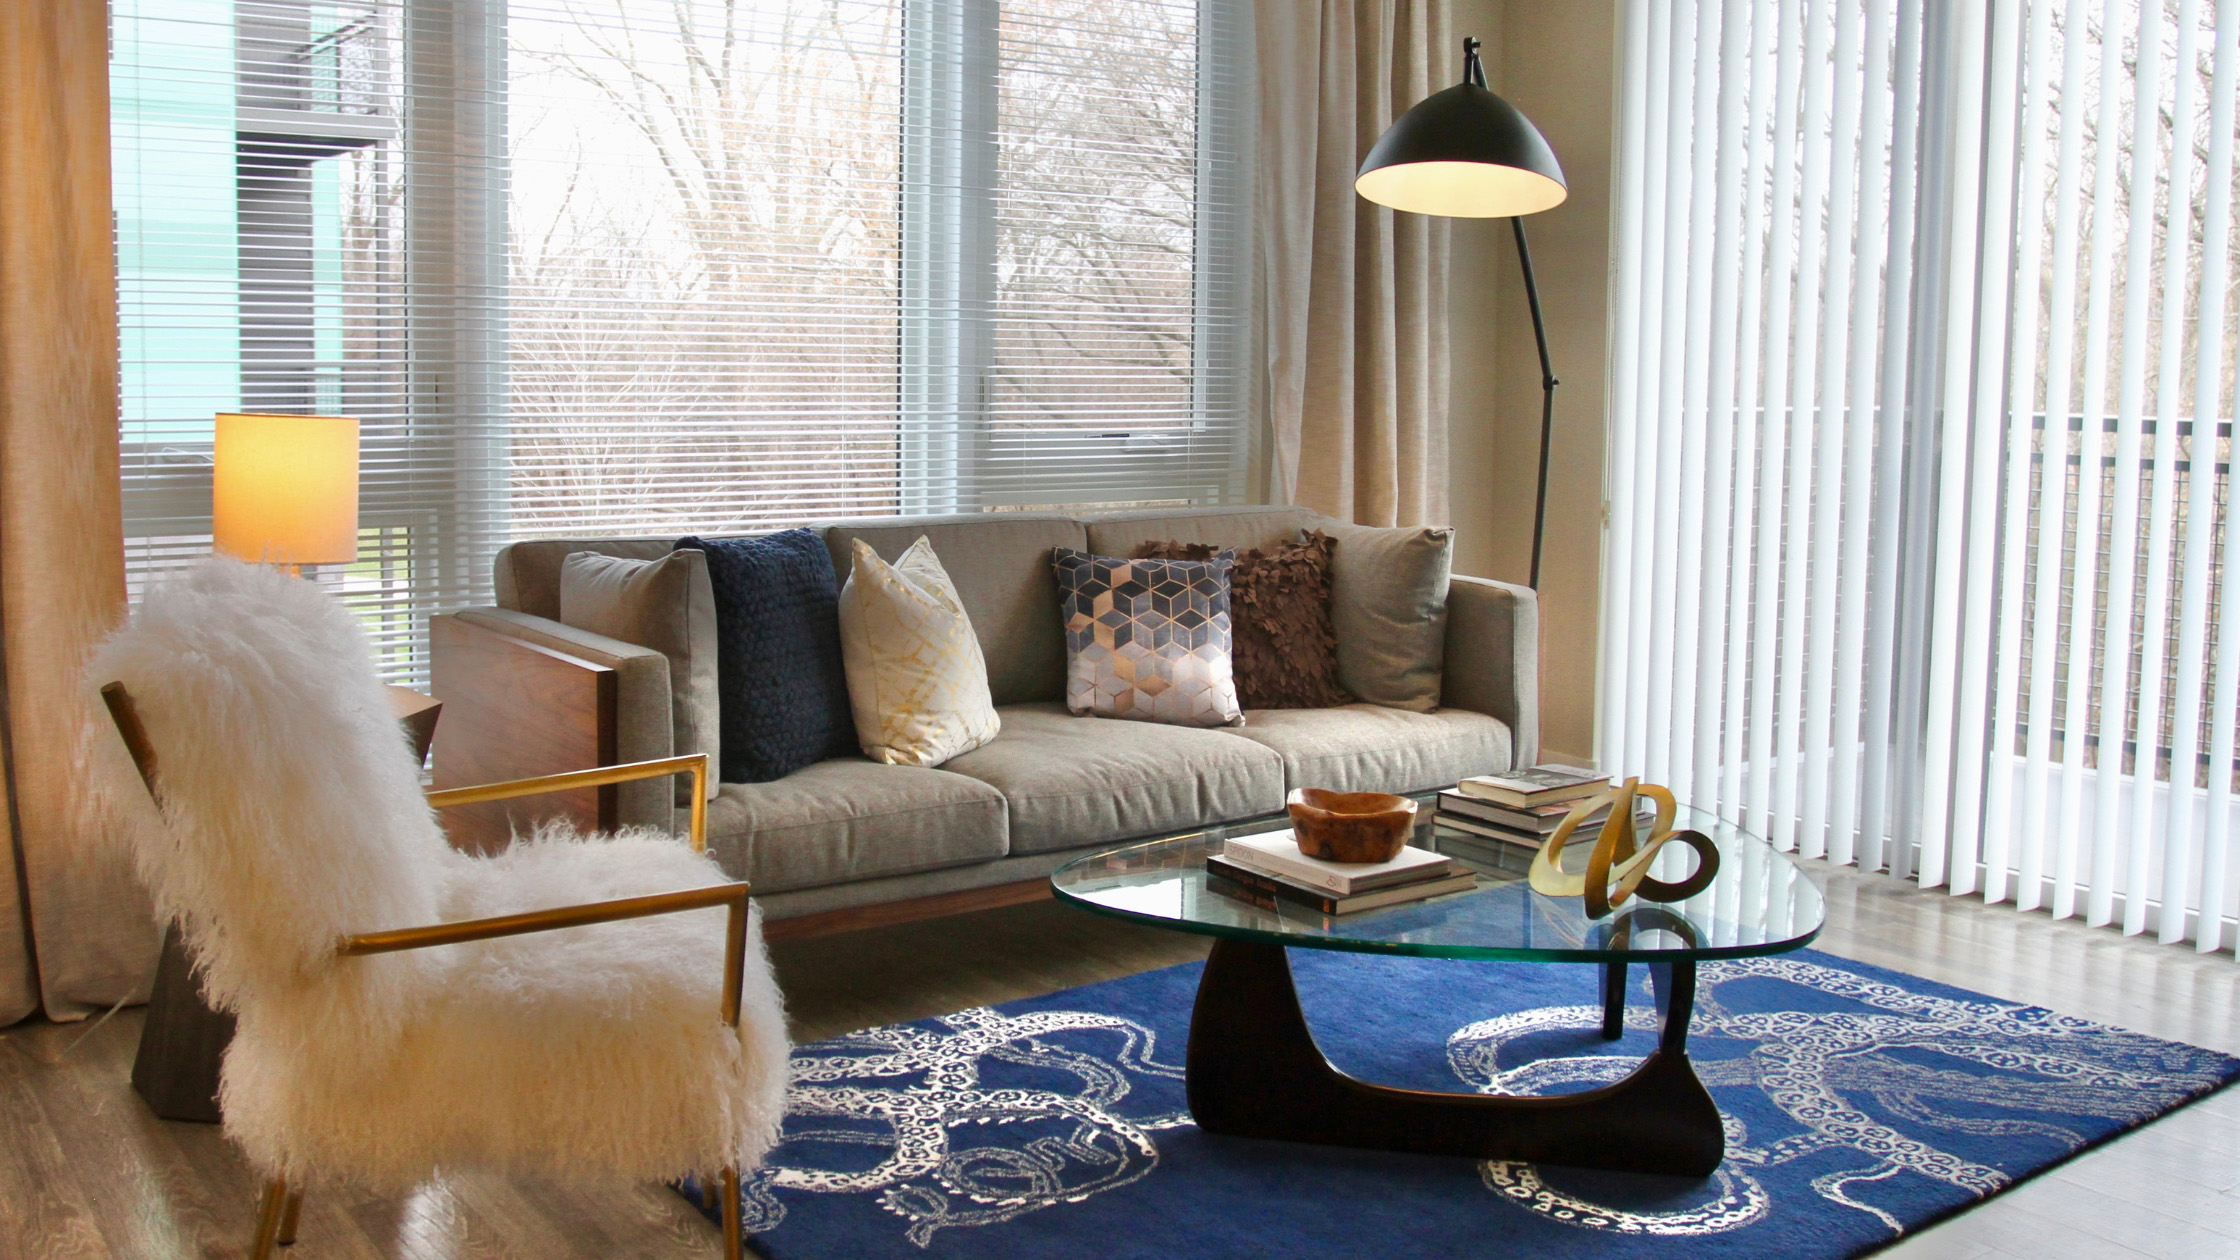 4 Small Changes to Make Your Apartment Cozy Cover Photo